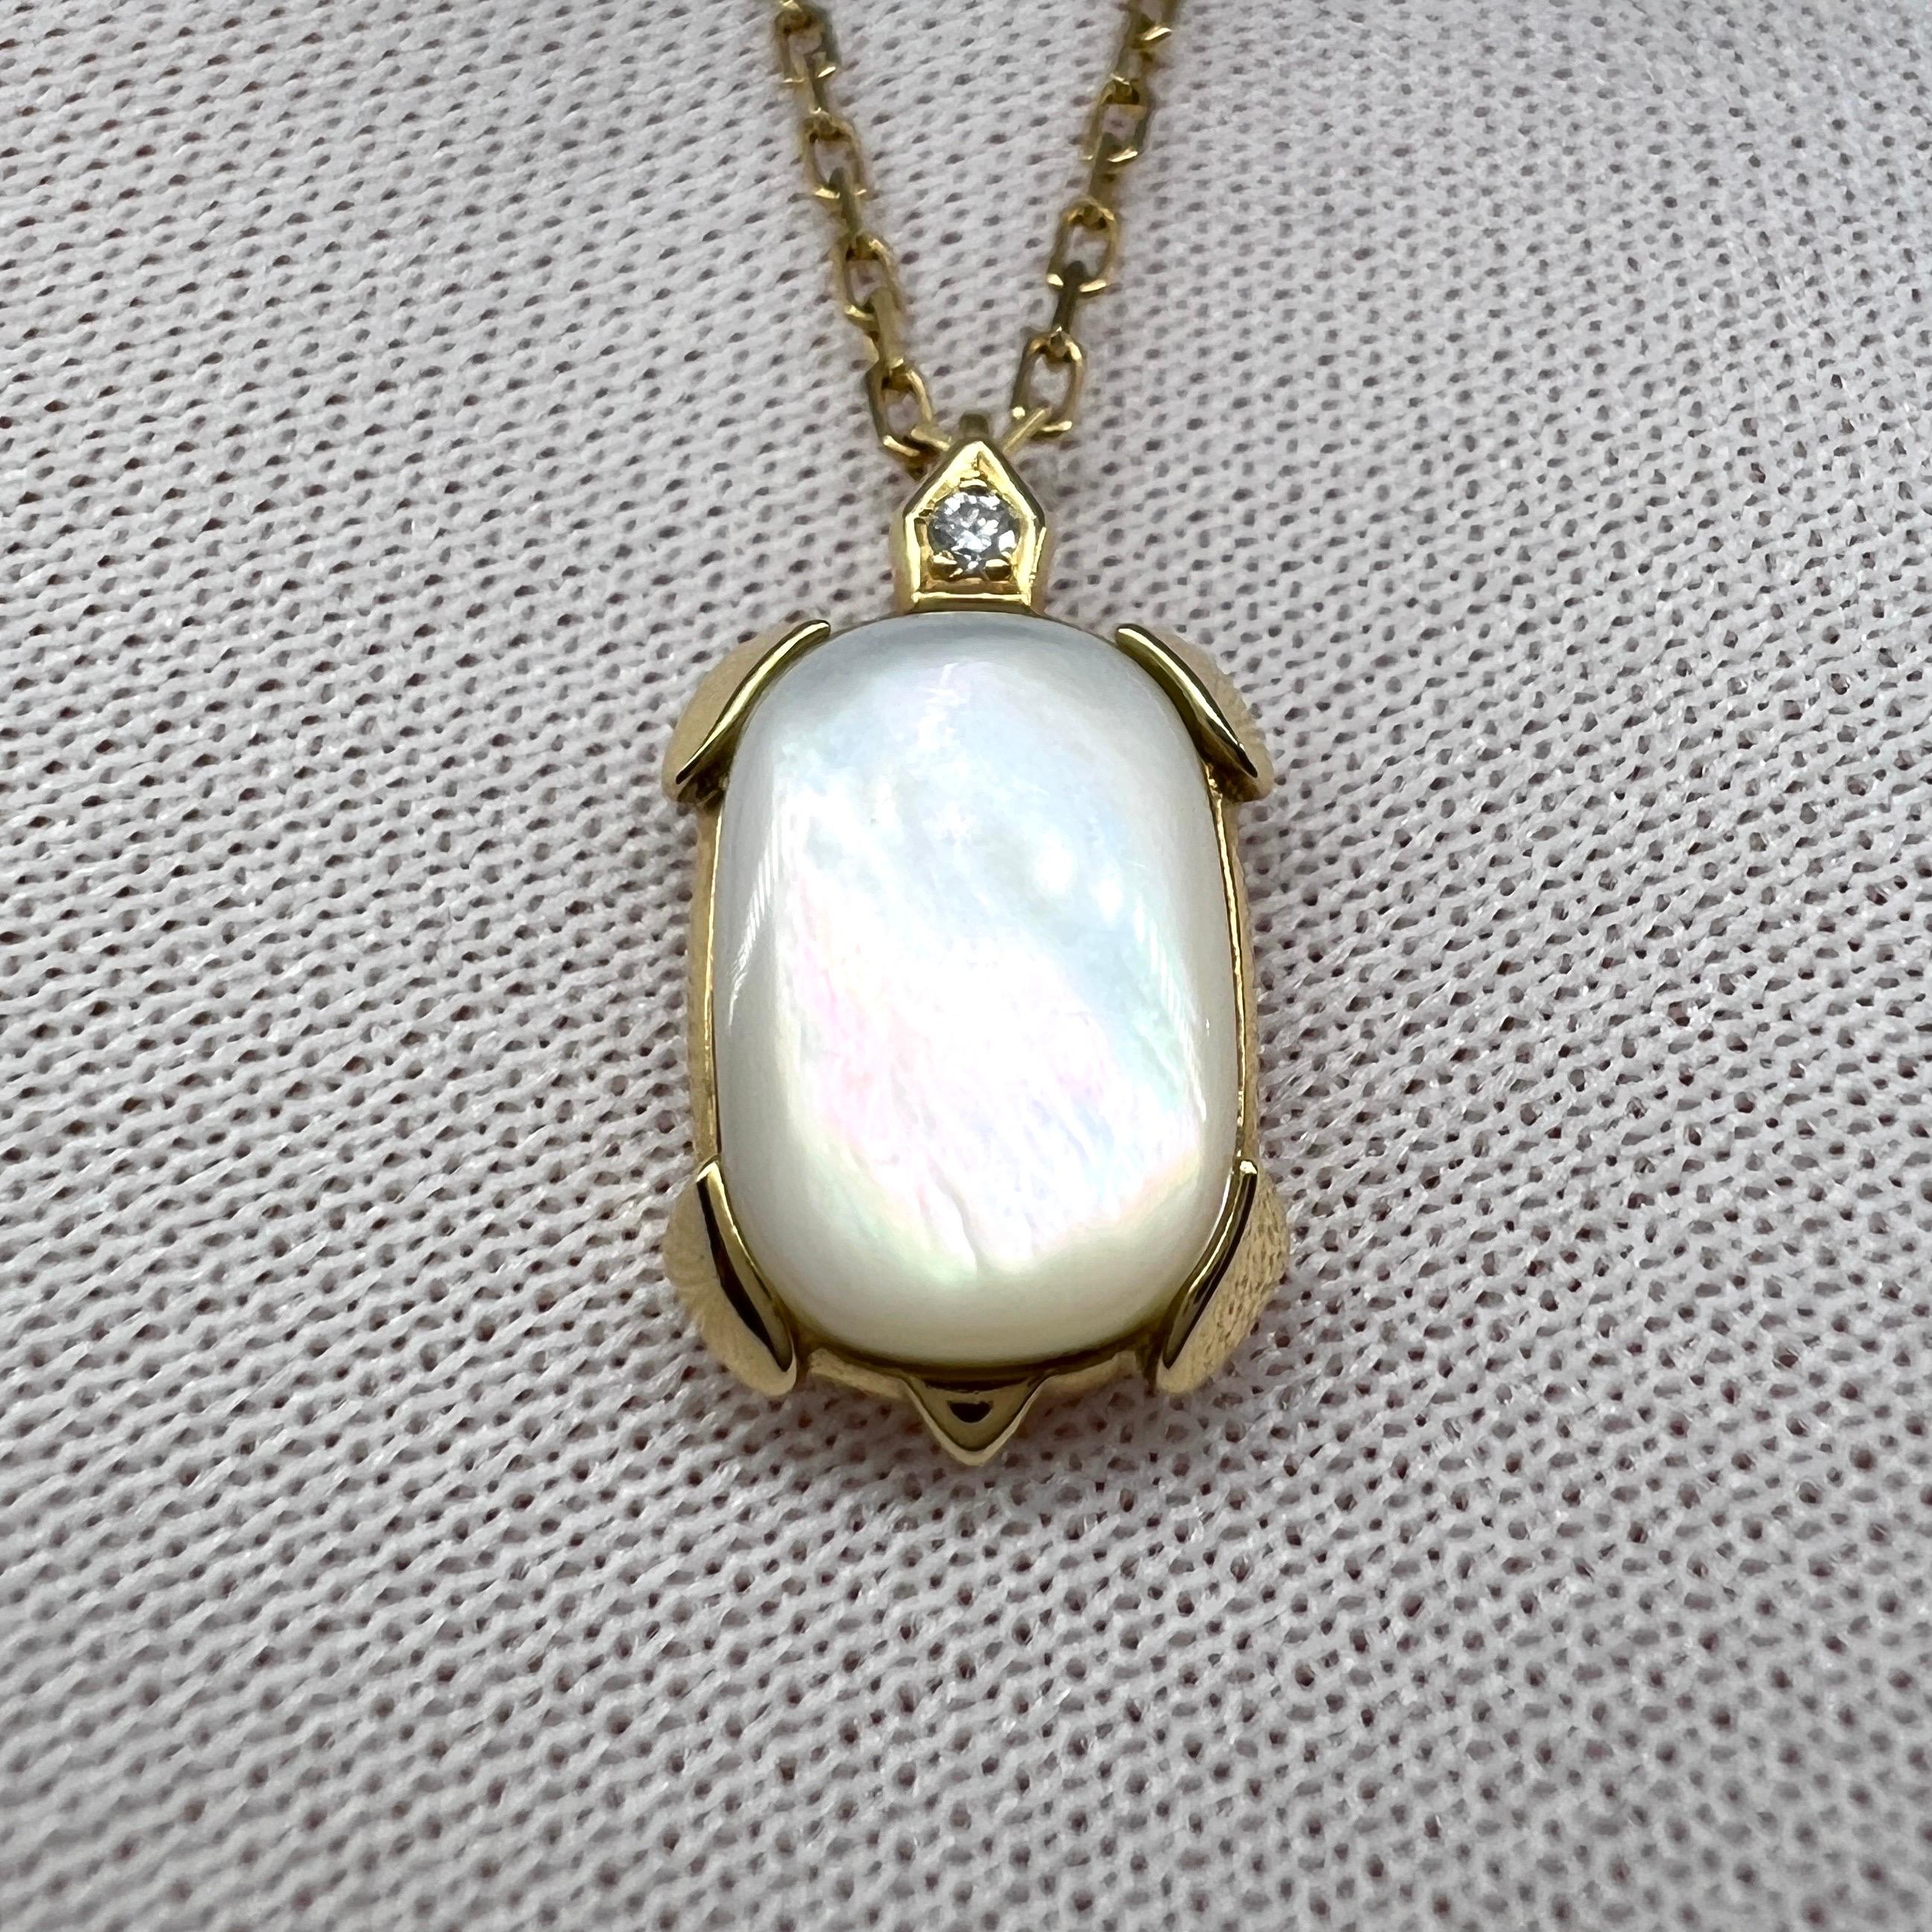 Rare Vintage Cartier Tortue Mother of Pearl & Diamond 18k Yellow Gold Pendant Necklace.

Stunning yellow gold necklace featuring a tortoise shaped pendant. Mother of pearl body with a diamond set in the head, this beautifully made pendant measures